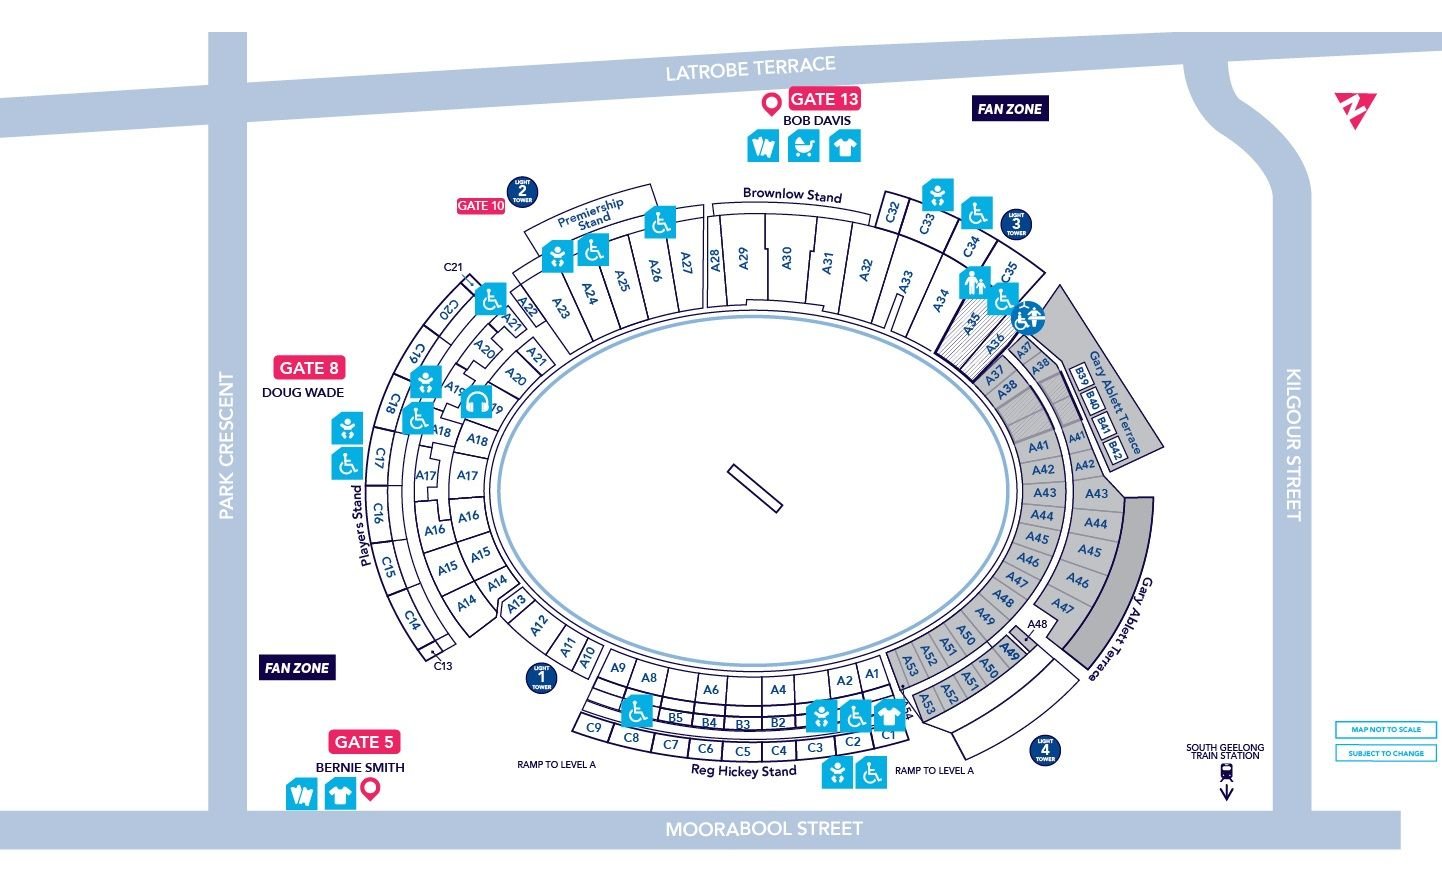 Kardinia Park Seating Map with Rows and Stands along with Seat Numbers